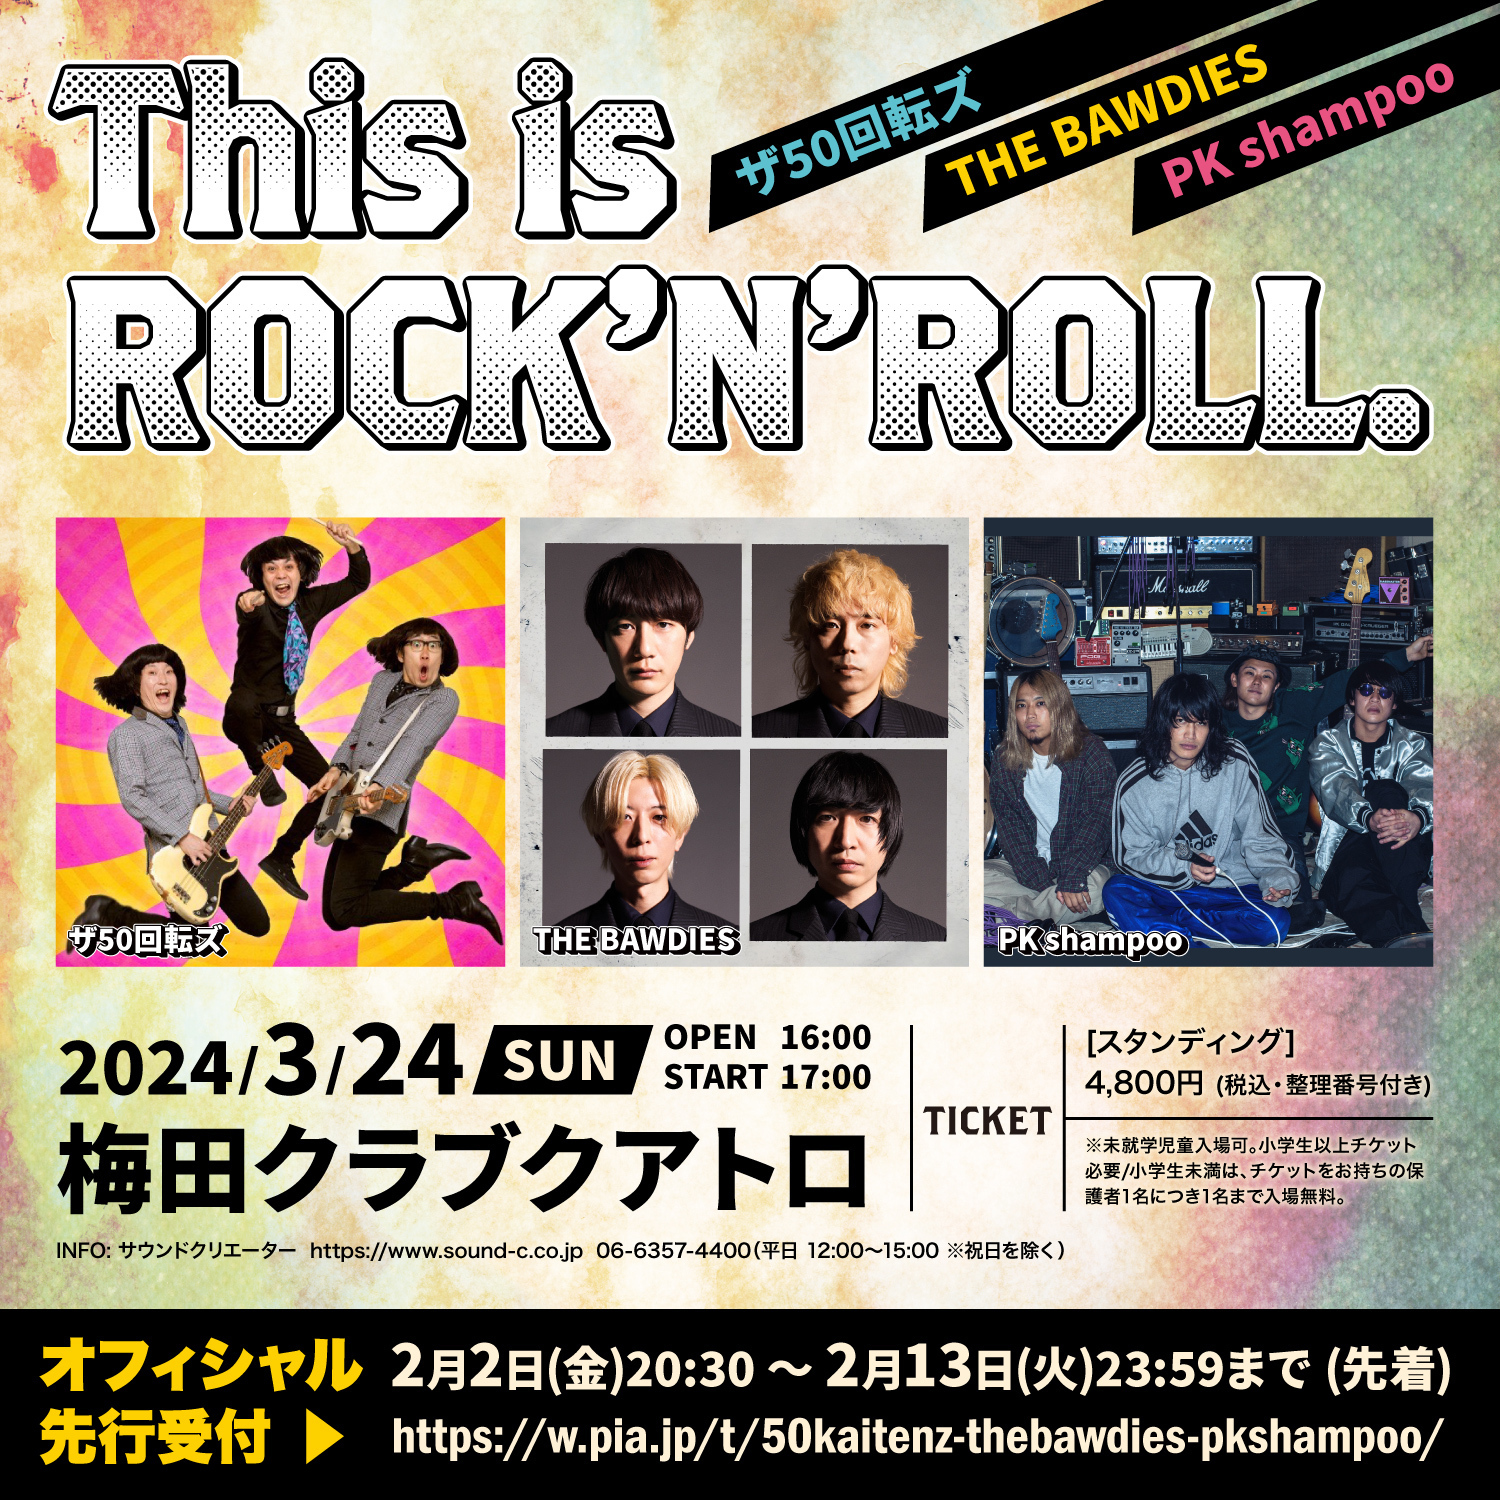 「This is ROCK’N’ROLL.」への出演が決定！